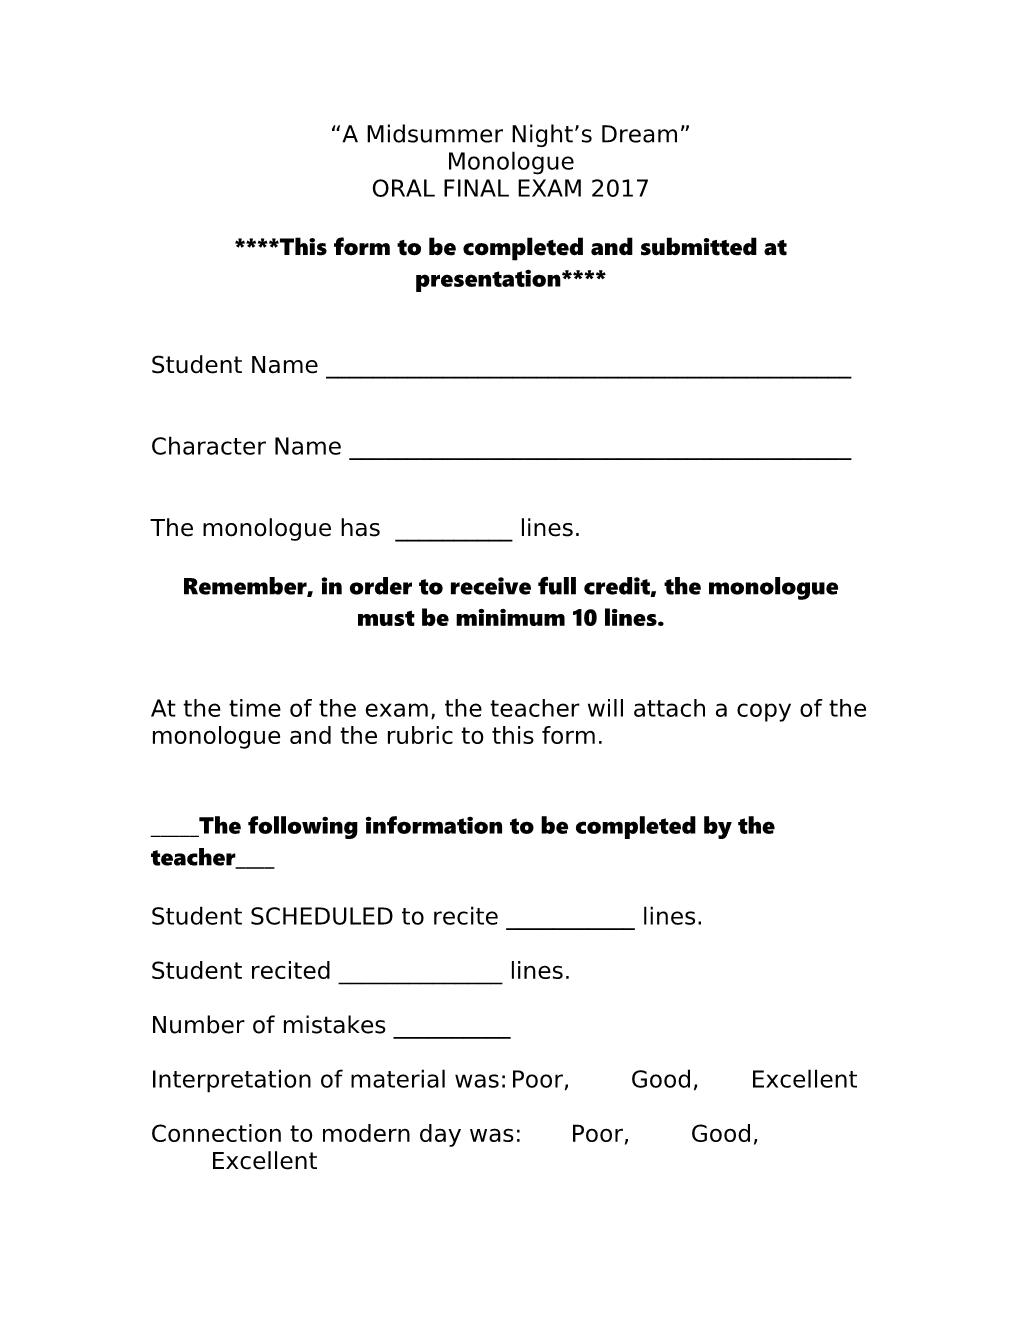 This Form to Be Completed and Submitted at Presentation